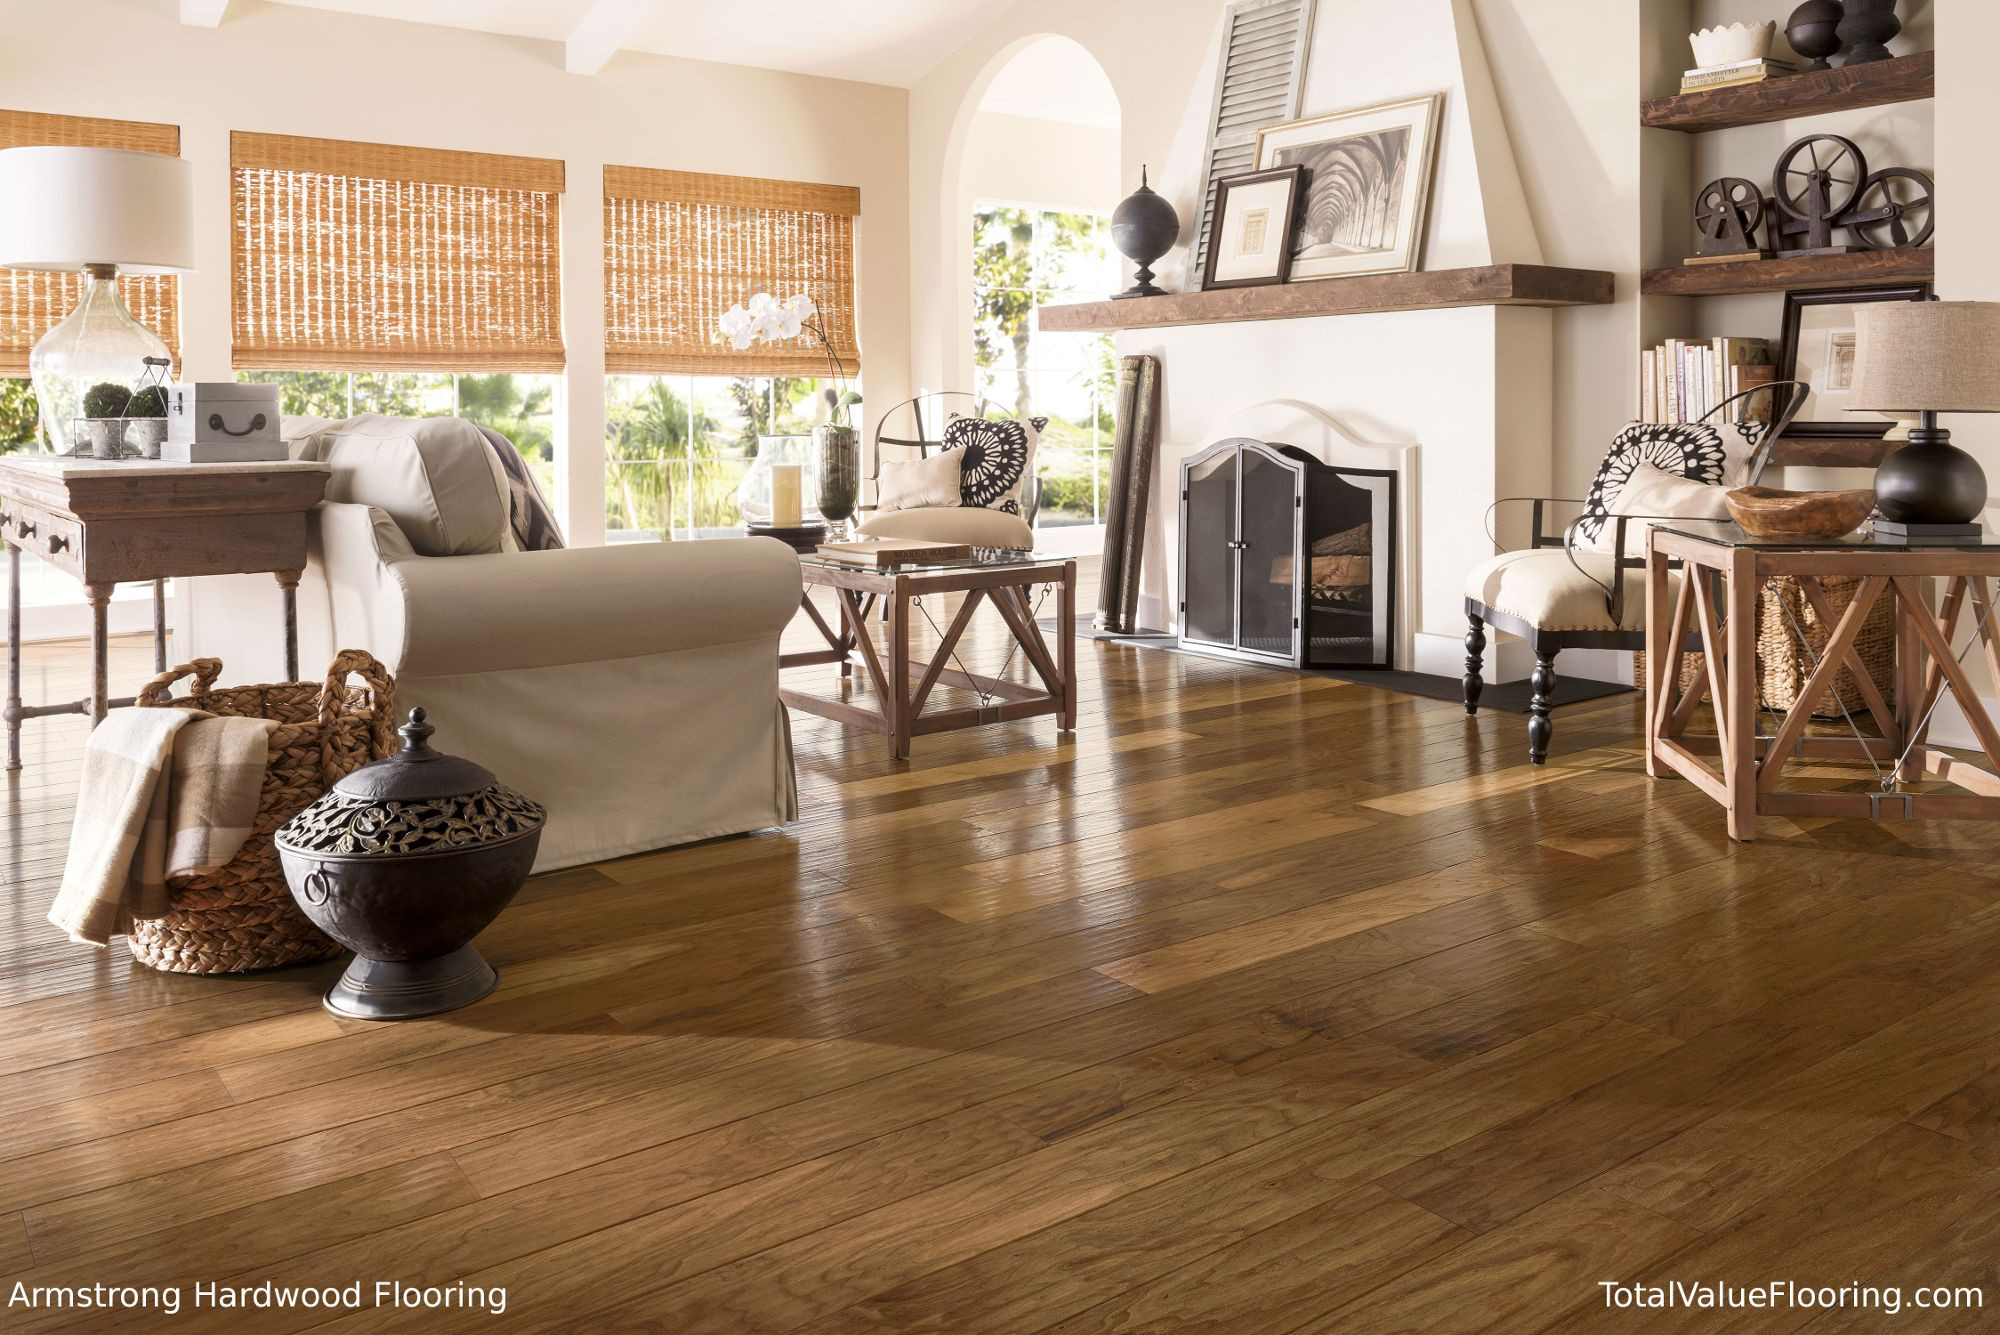 13 Wonderful Bruce Hand Scraped Hardwood Flooring 2024 free download bruce hand scraped hardwood flooring of walnut natural american scrape hardwood floor from armstrong throughout learn more about armstrong walnut buck horn and order a sample or find a floor